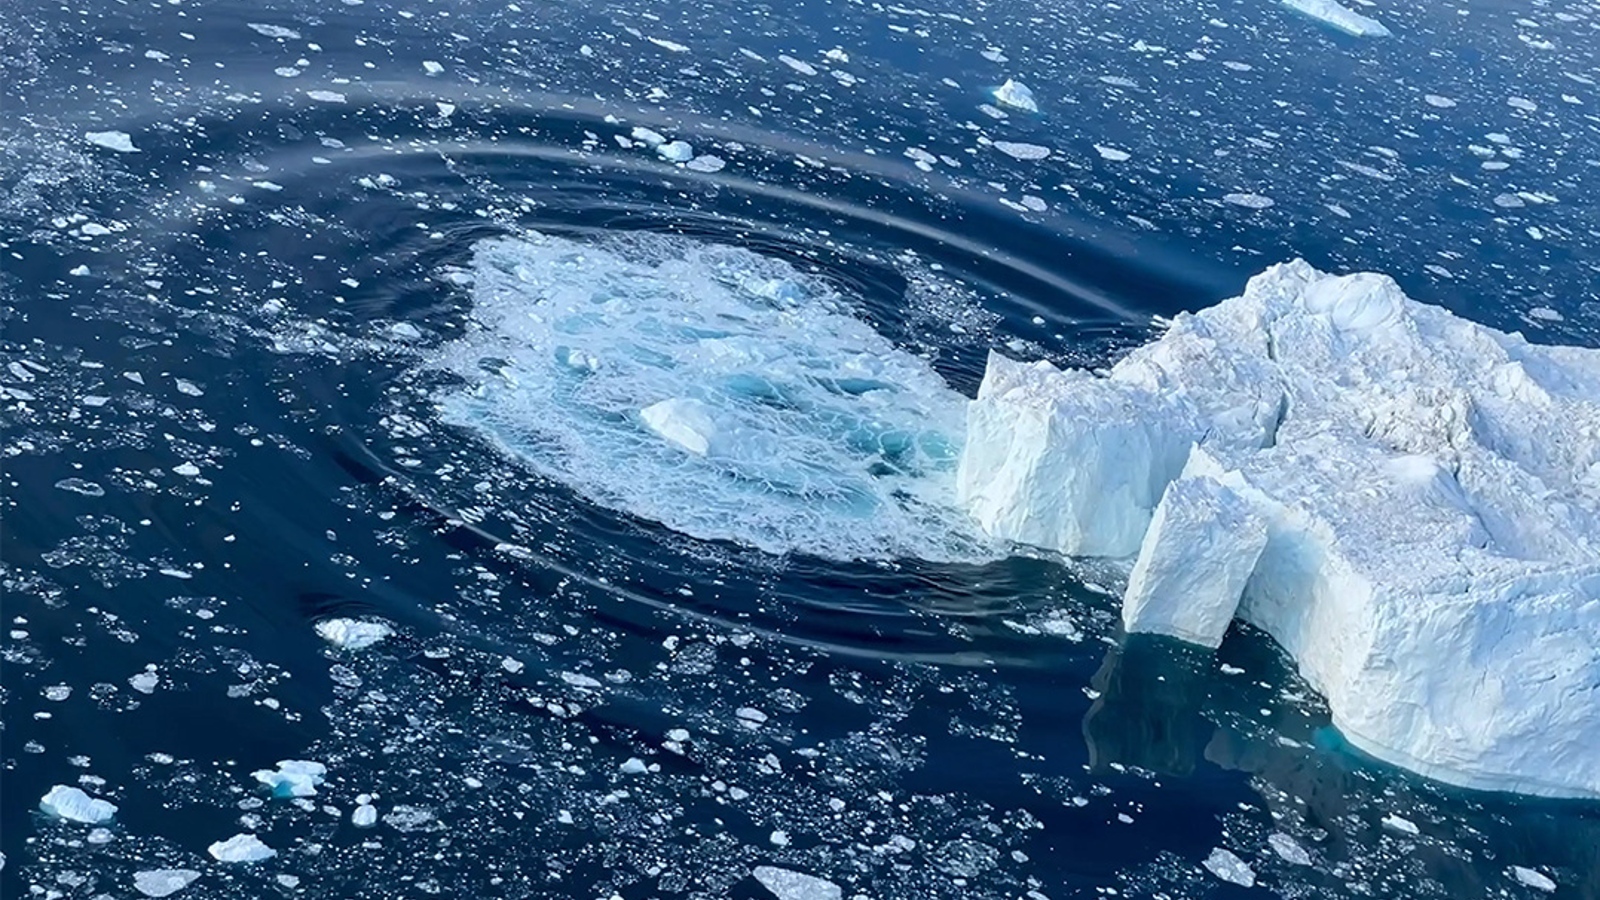 A photo of a large chunk of ice falling into the sea from a glacier, creating a circular wave